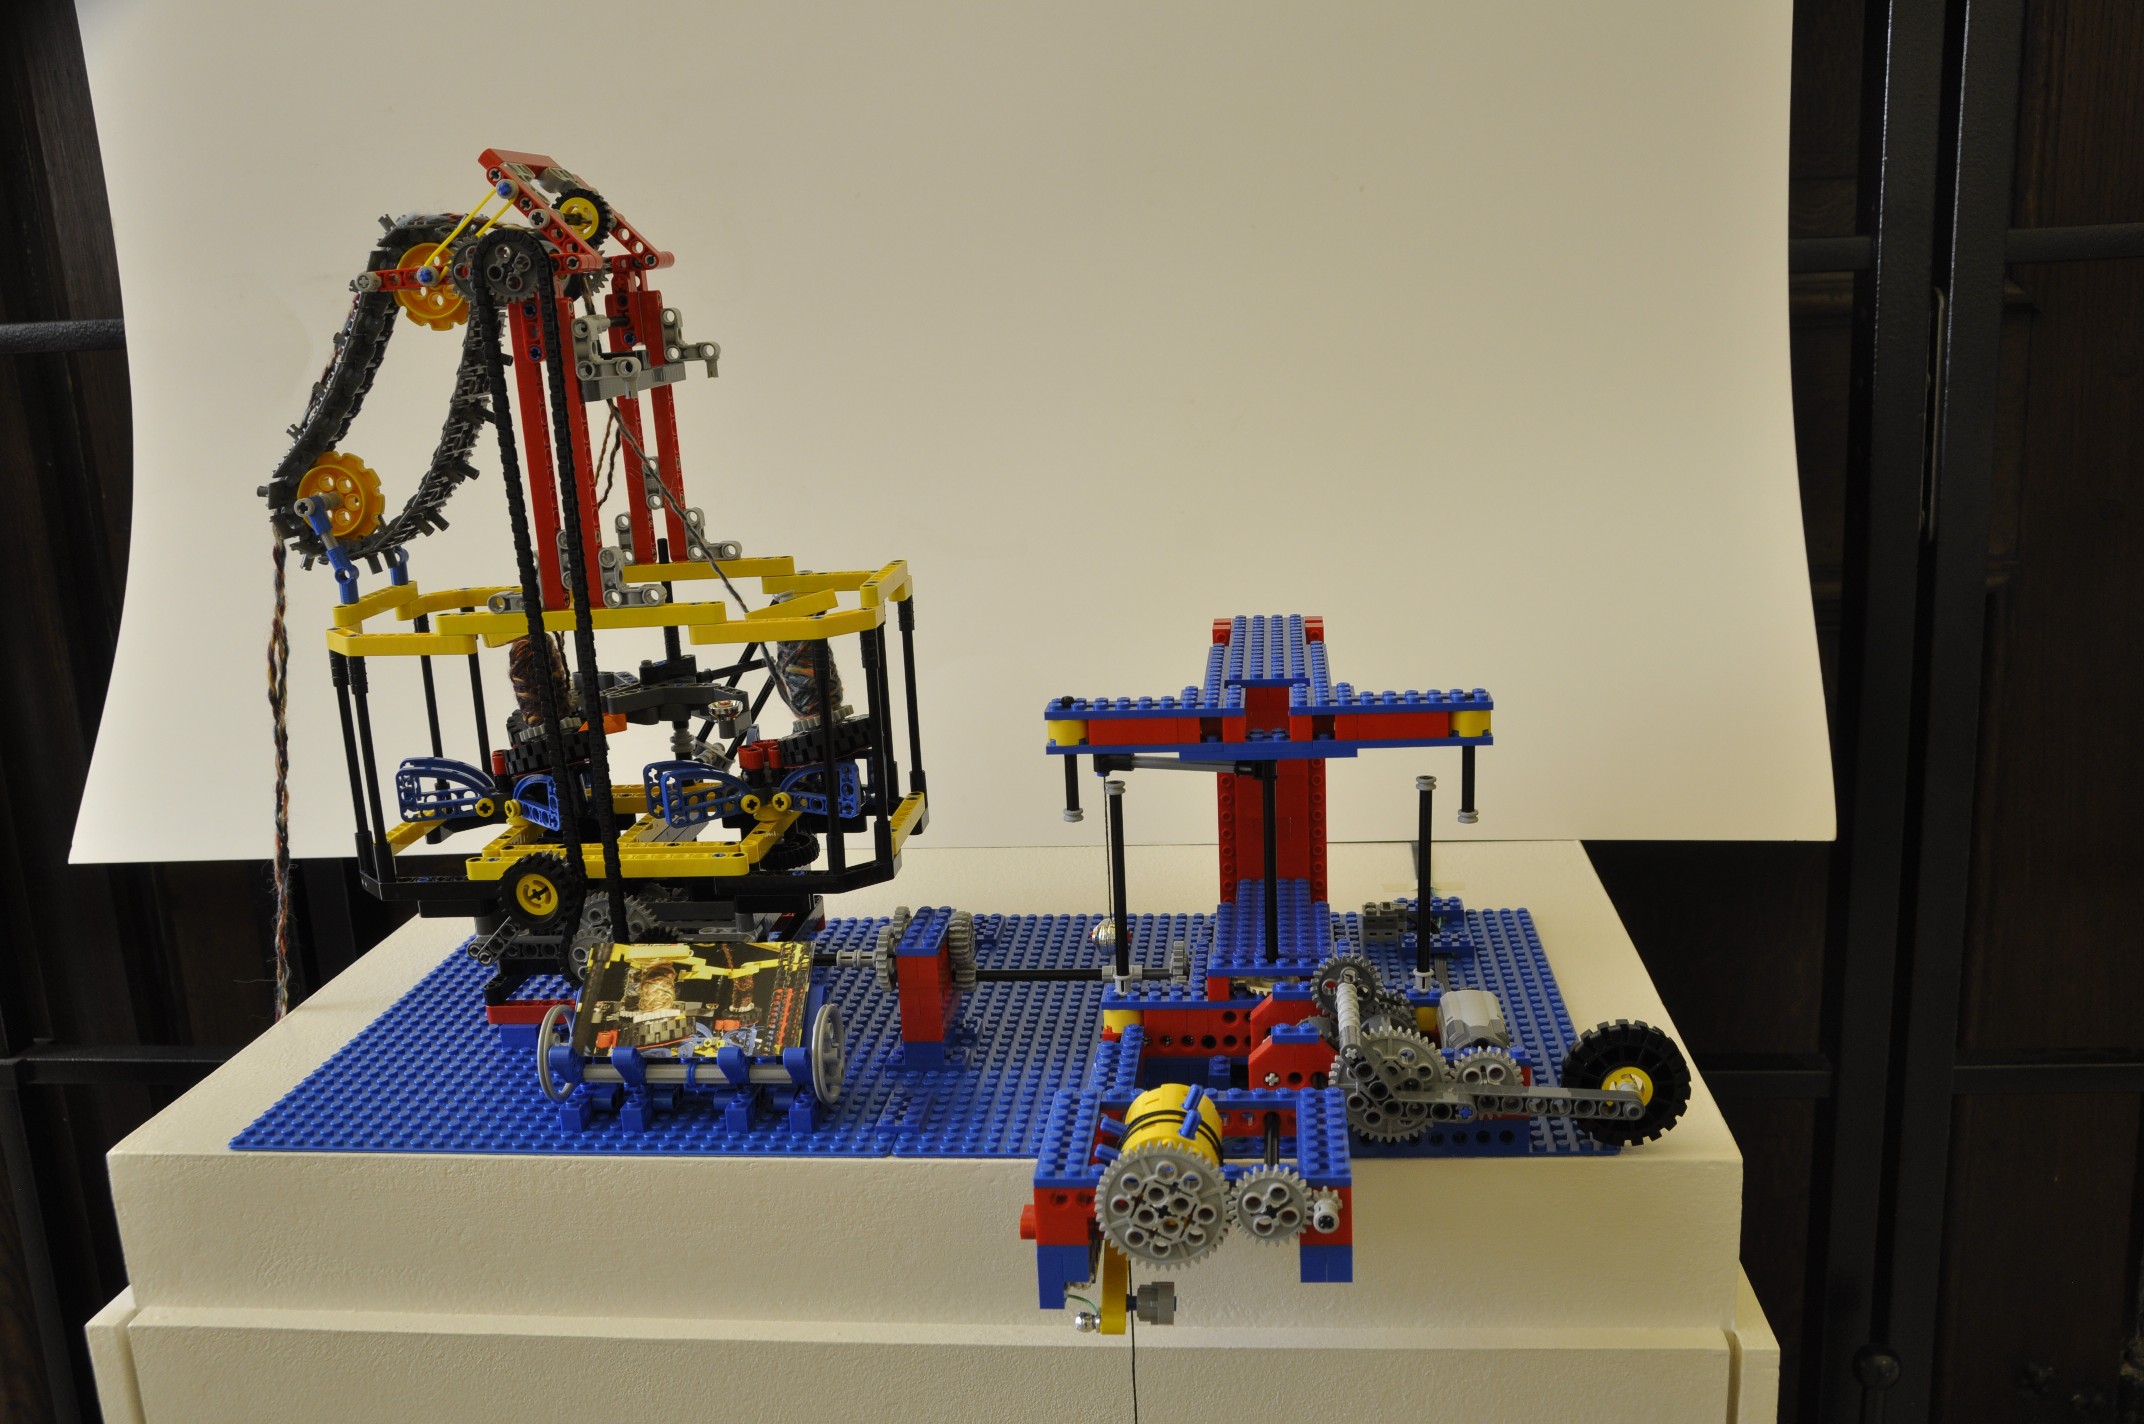 Plaiting machine made of LEGO by Alex Allmont Oxford, 2010